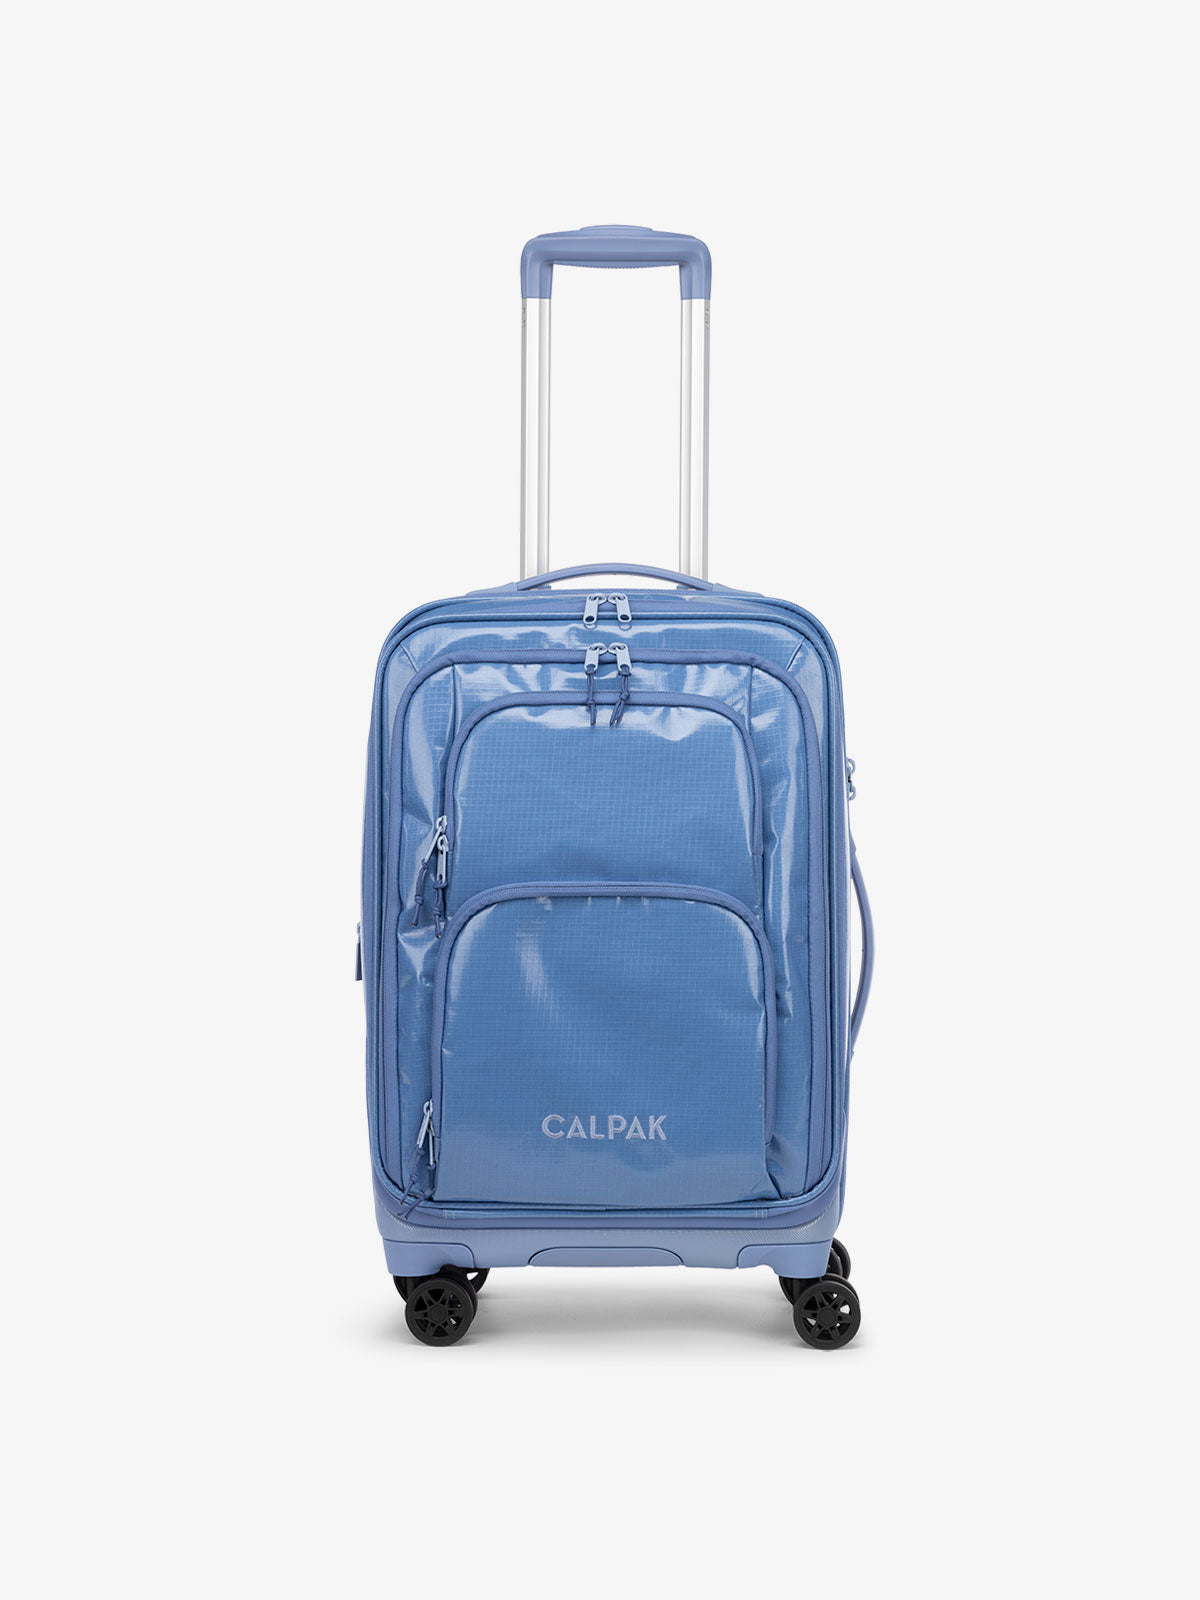 CALPAK Terra Carry-On Luggage front soft shell view with 360 spinner wheels in glacier